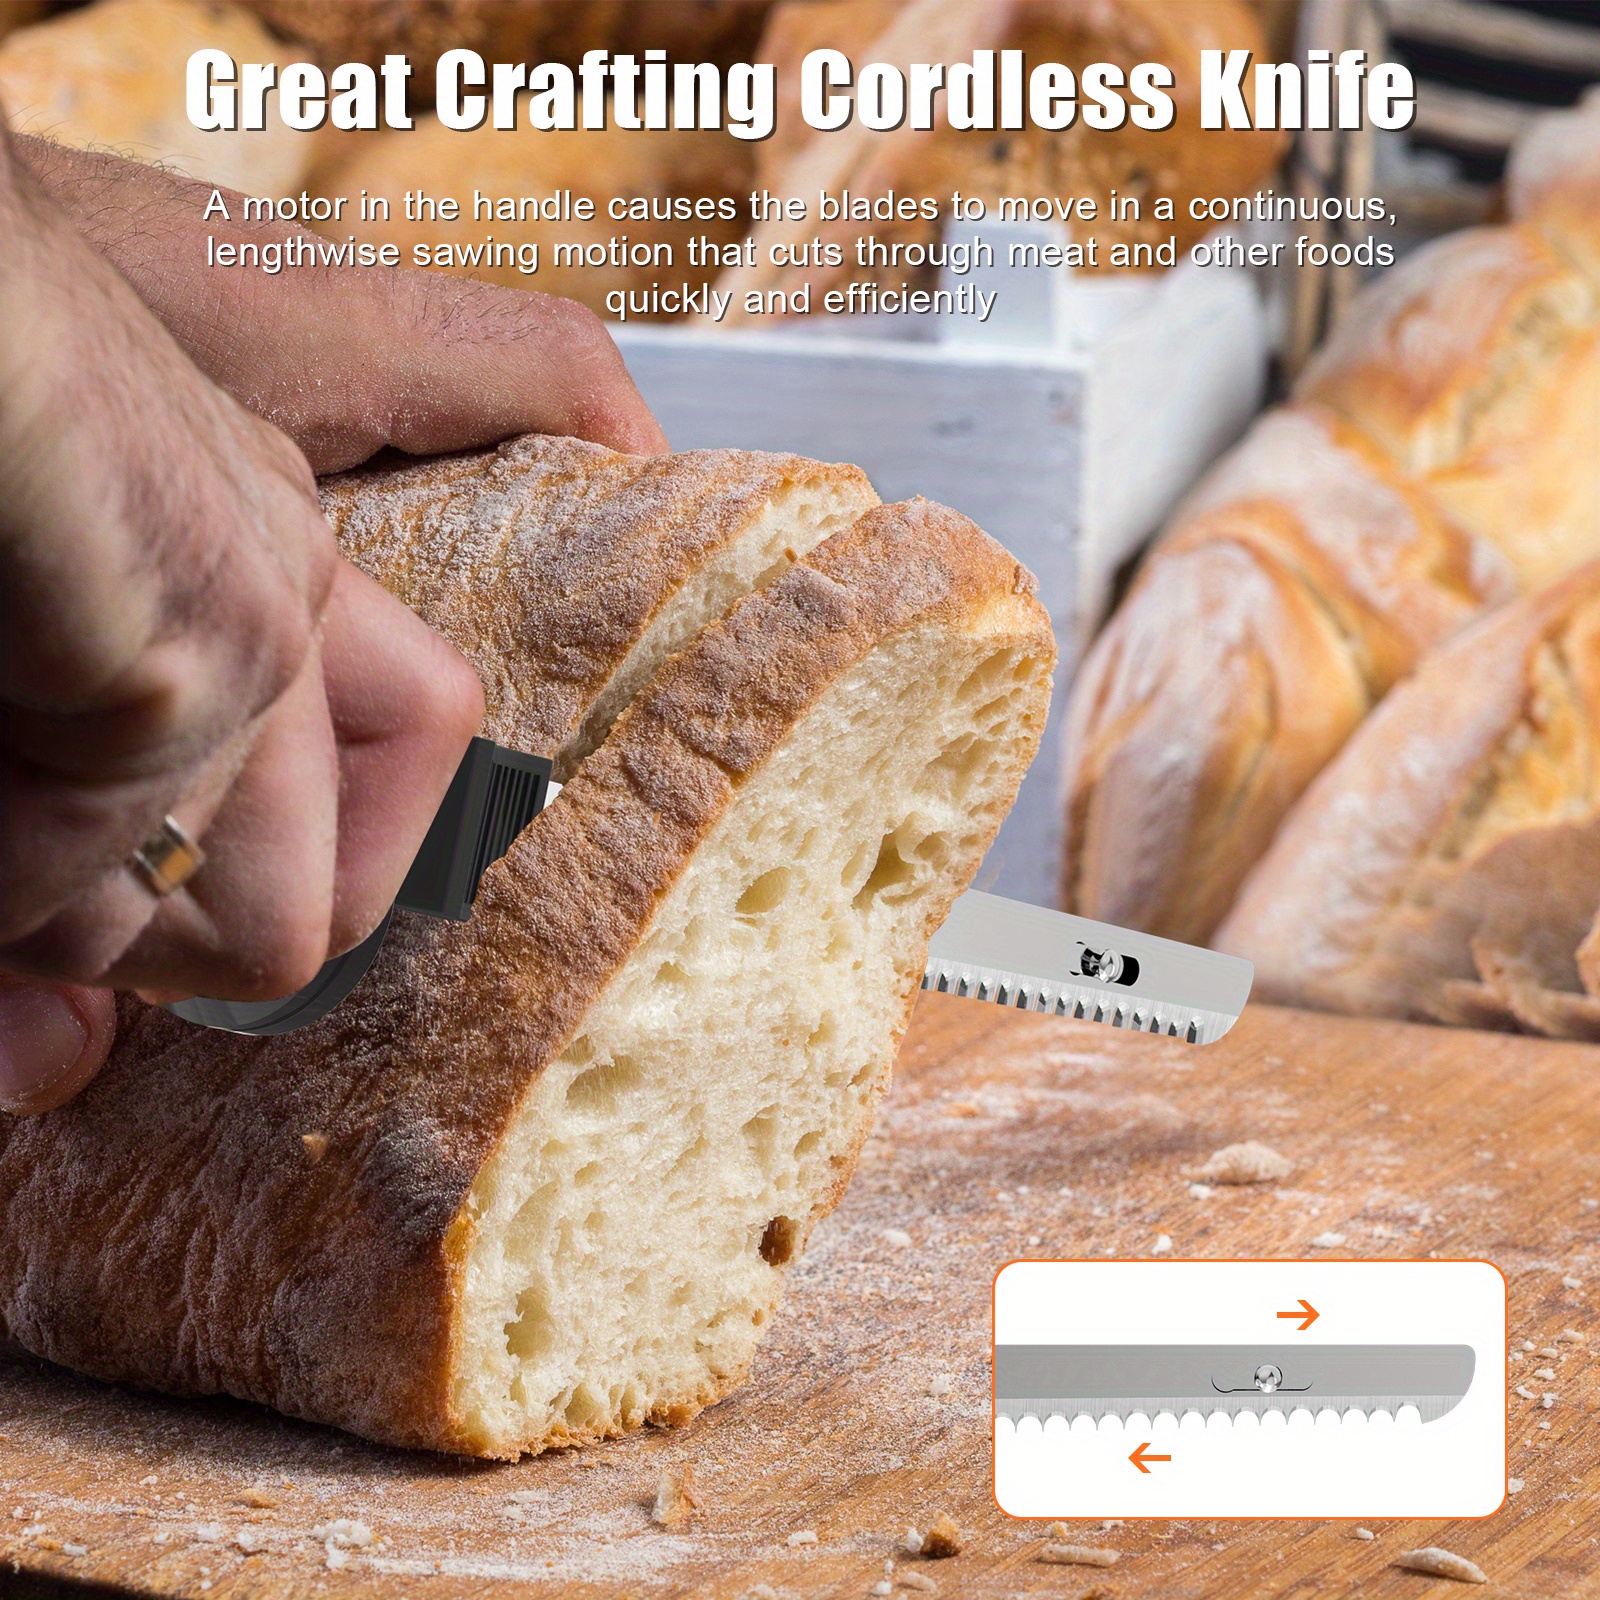  ENERTWIST Cordless Electric Carving Knife 1S Quick Start  One-Hand Operation Easy to Use with Safety Lock Button for Carving  Bread,Turkey, Poultry,Crafting Foam : Home & Kitchen